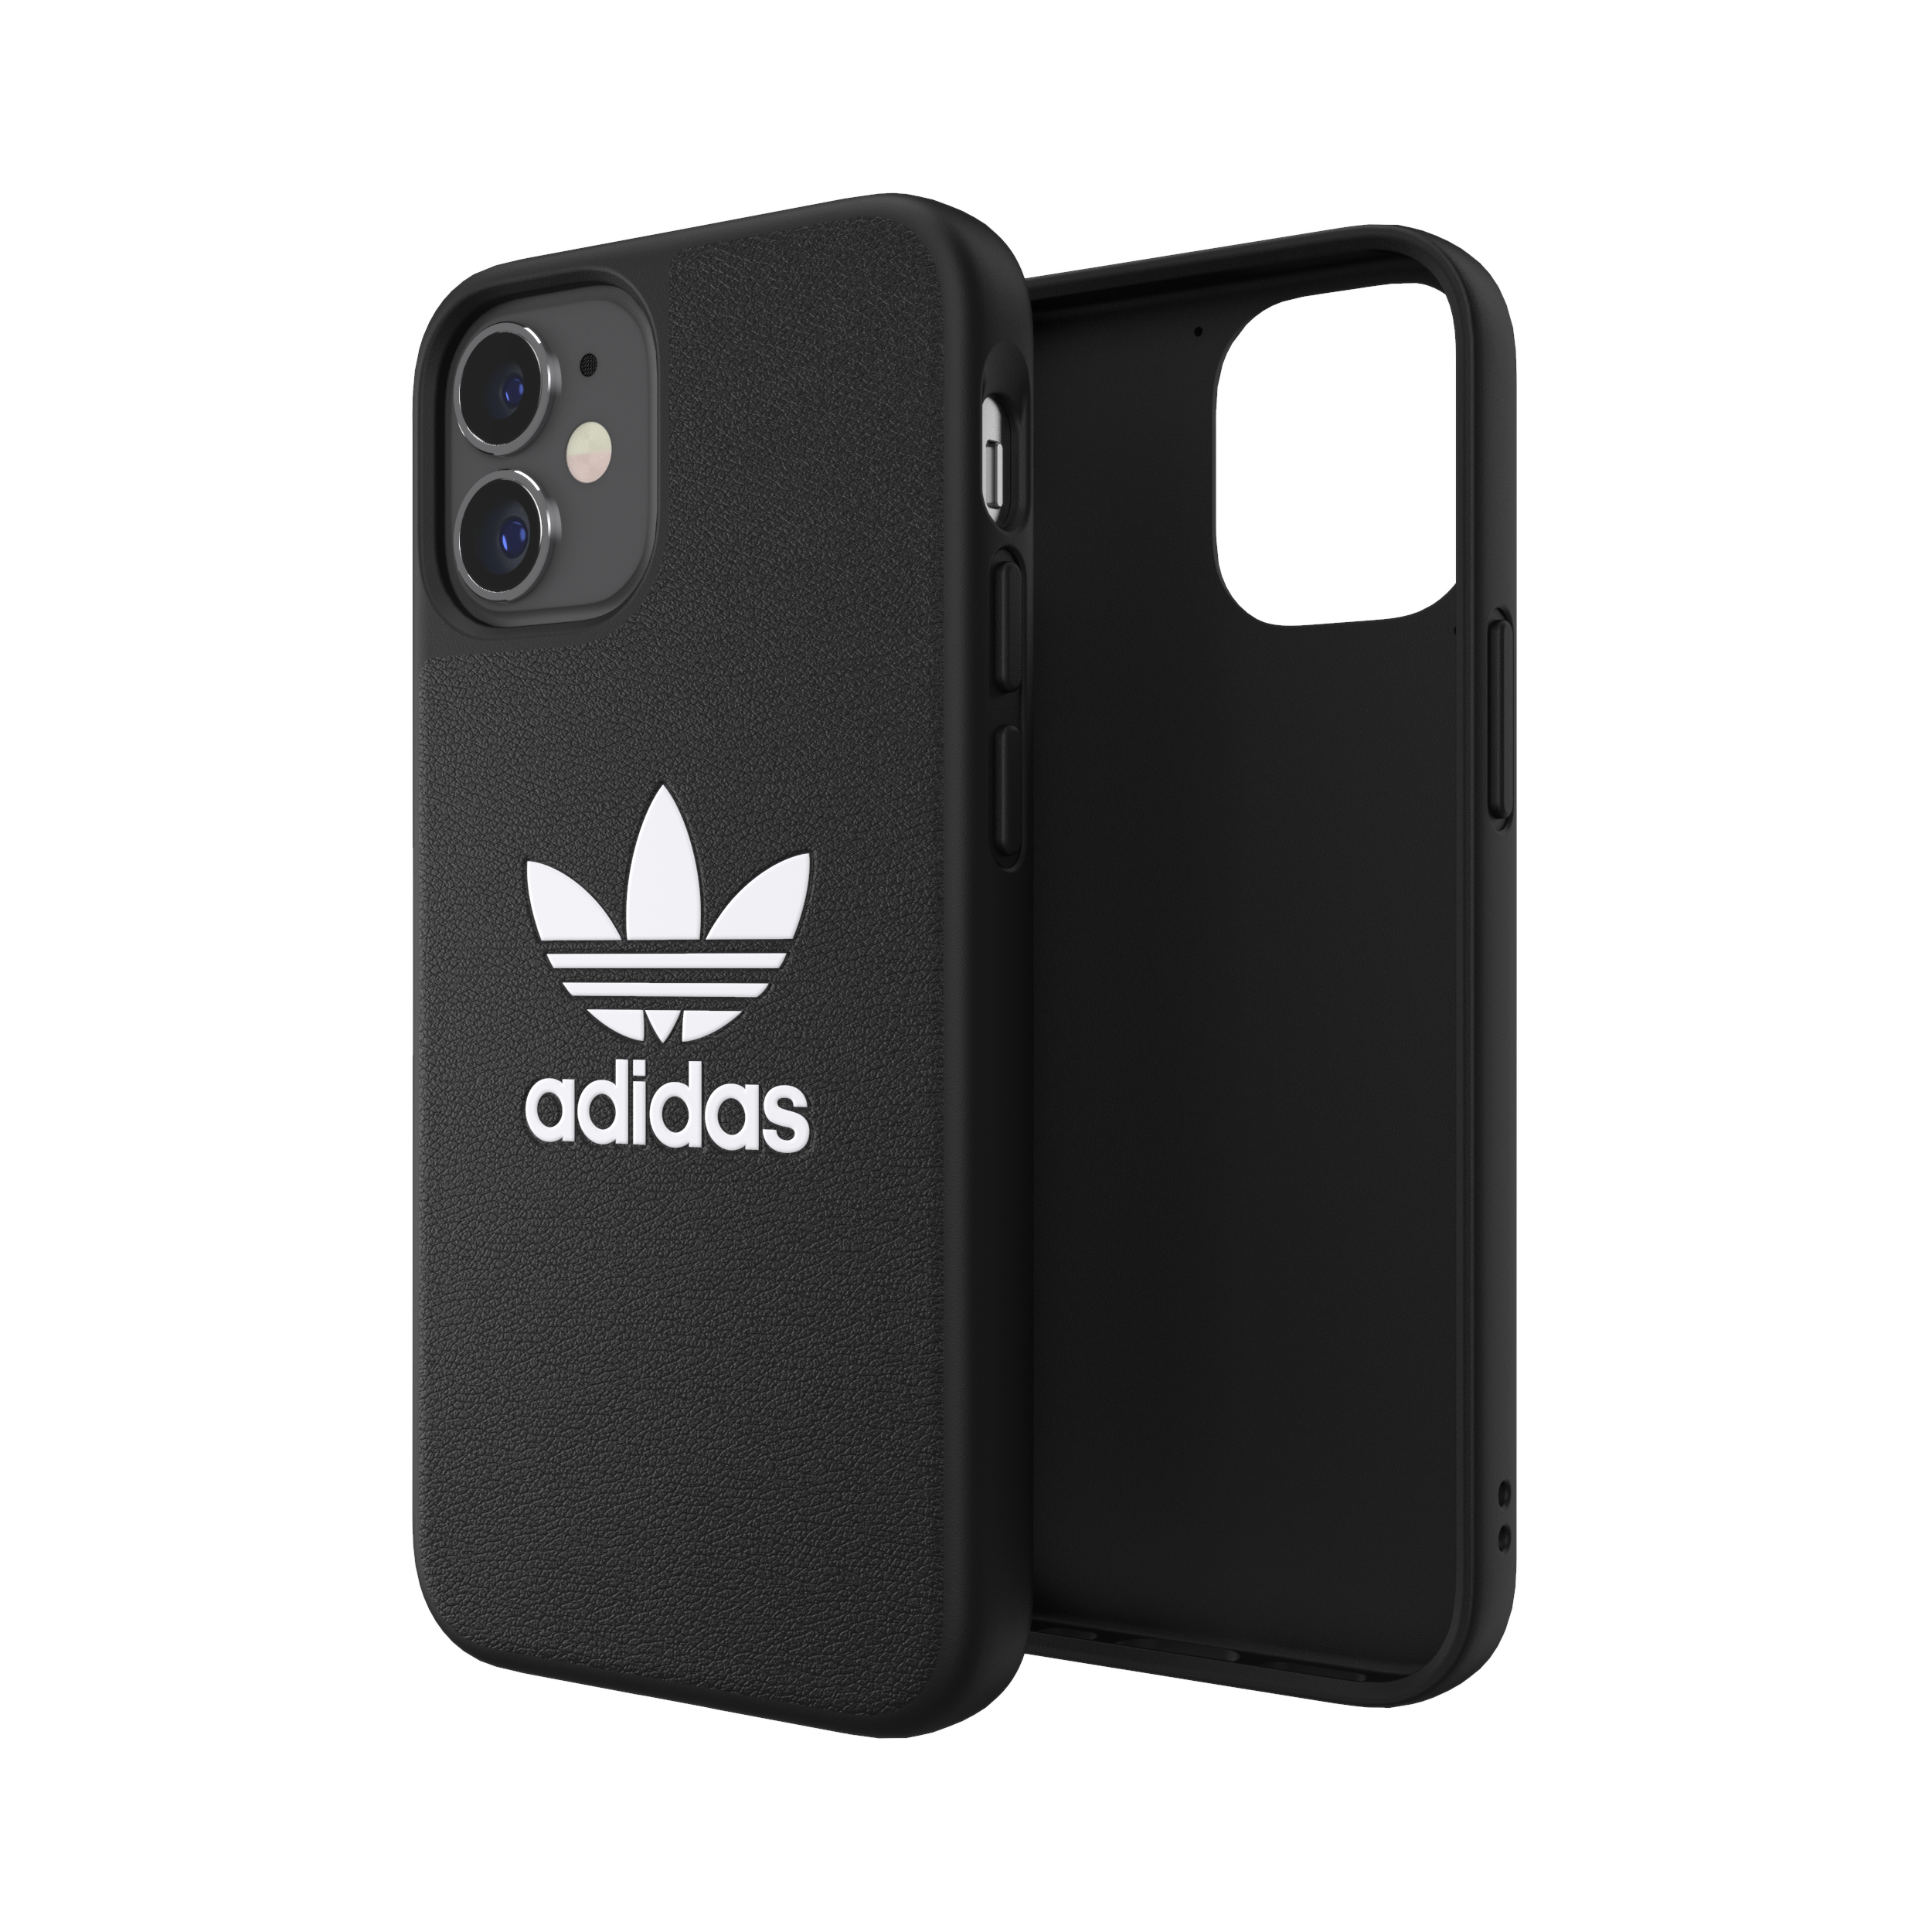 Adidas ORIGINALS Apple iPhone 12 Mini Basic Moulded Case - Back cover w/ Trefoil Design, Scratch & Drop Protection w/ TPU Bumper, Wireless Charging Compatible - Black/White